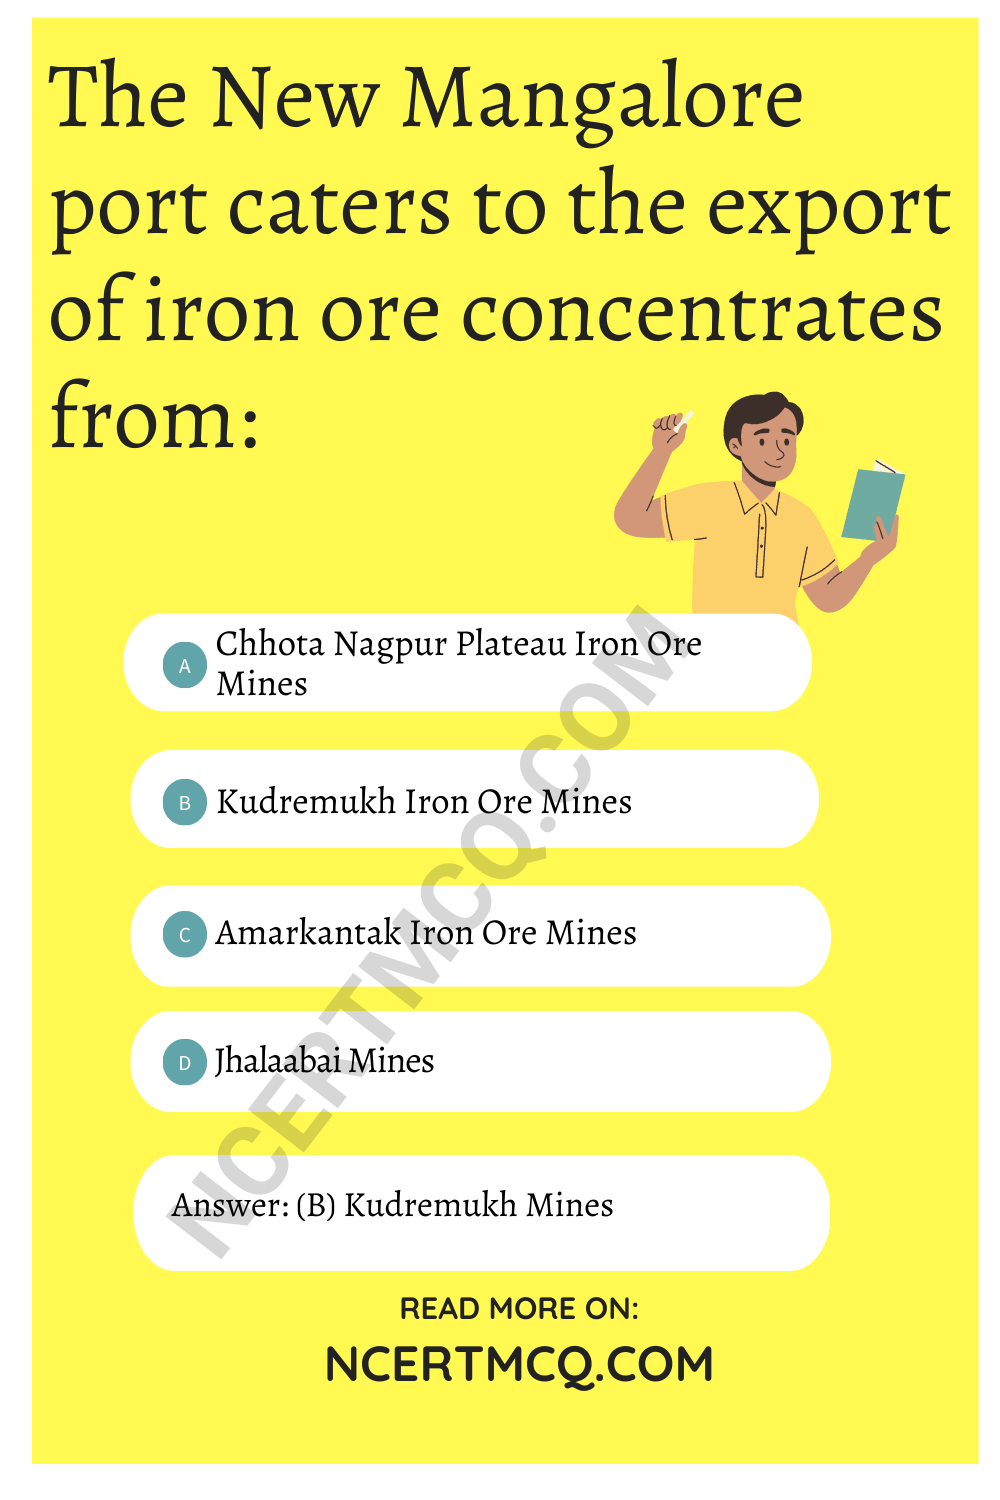 The New Mangalore port caters to the export of iron ore concentrates from: